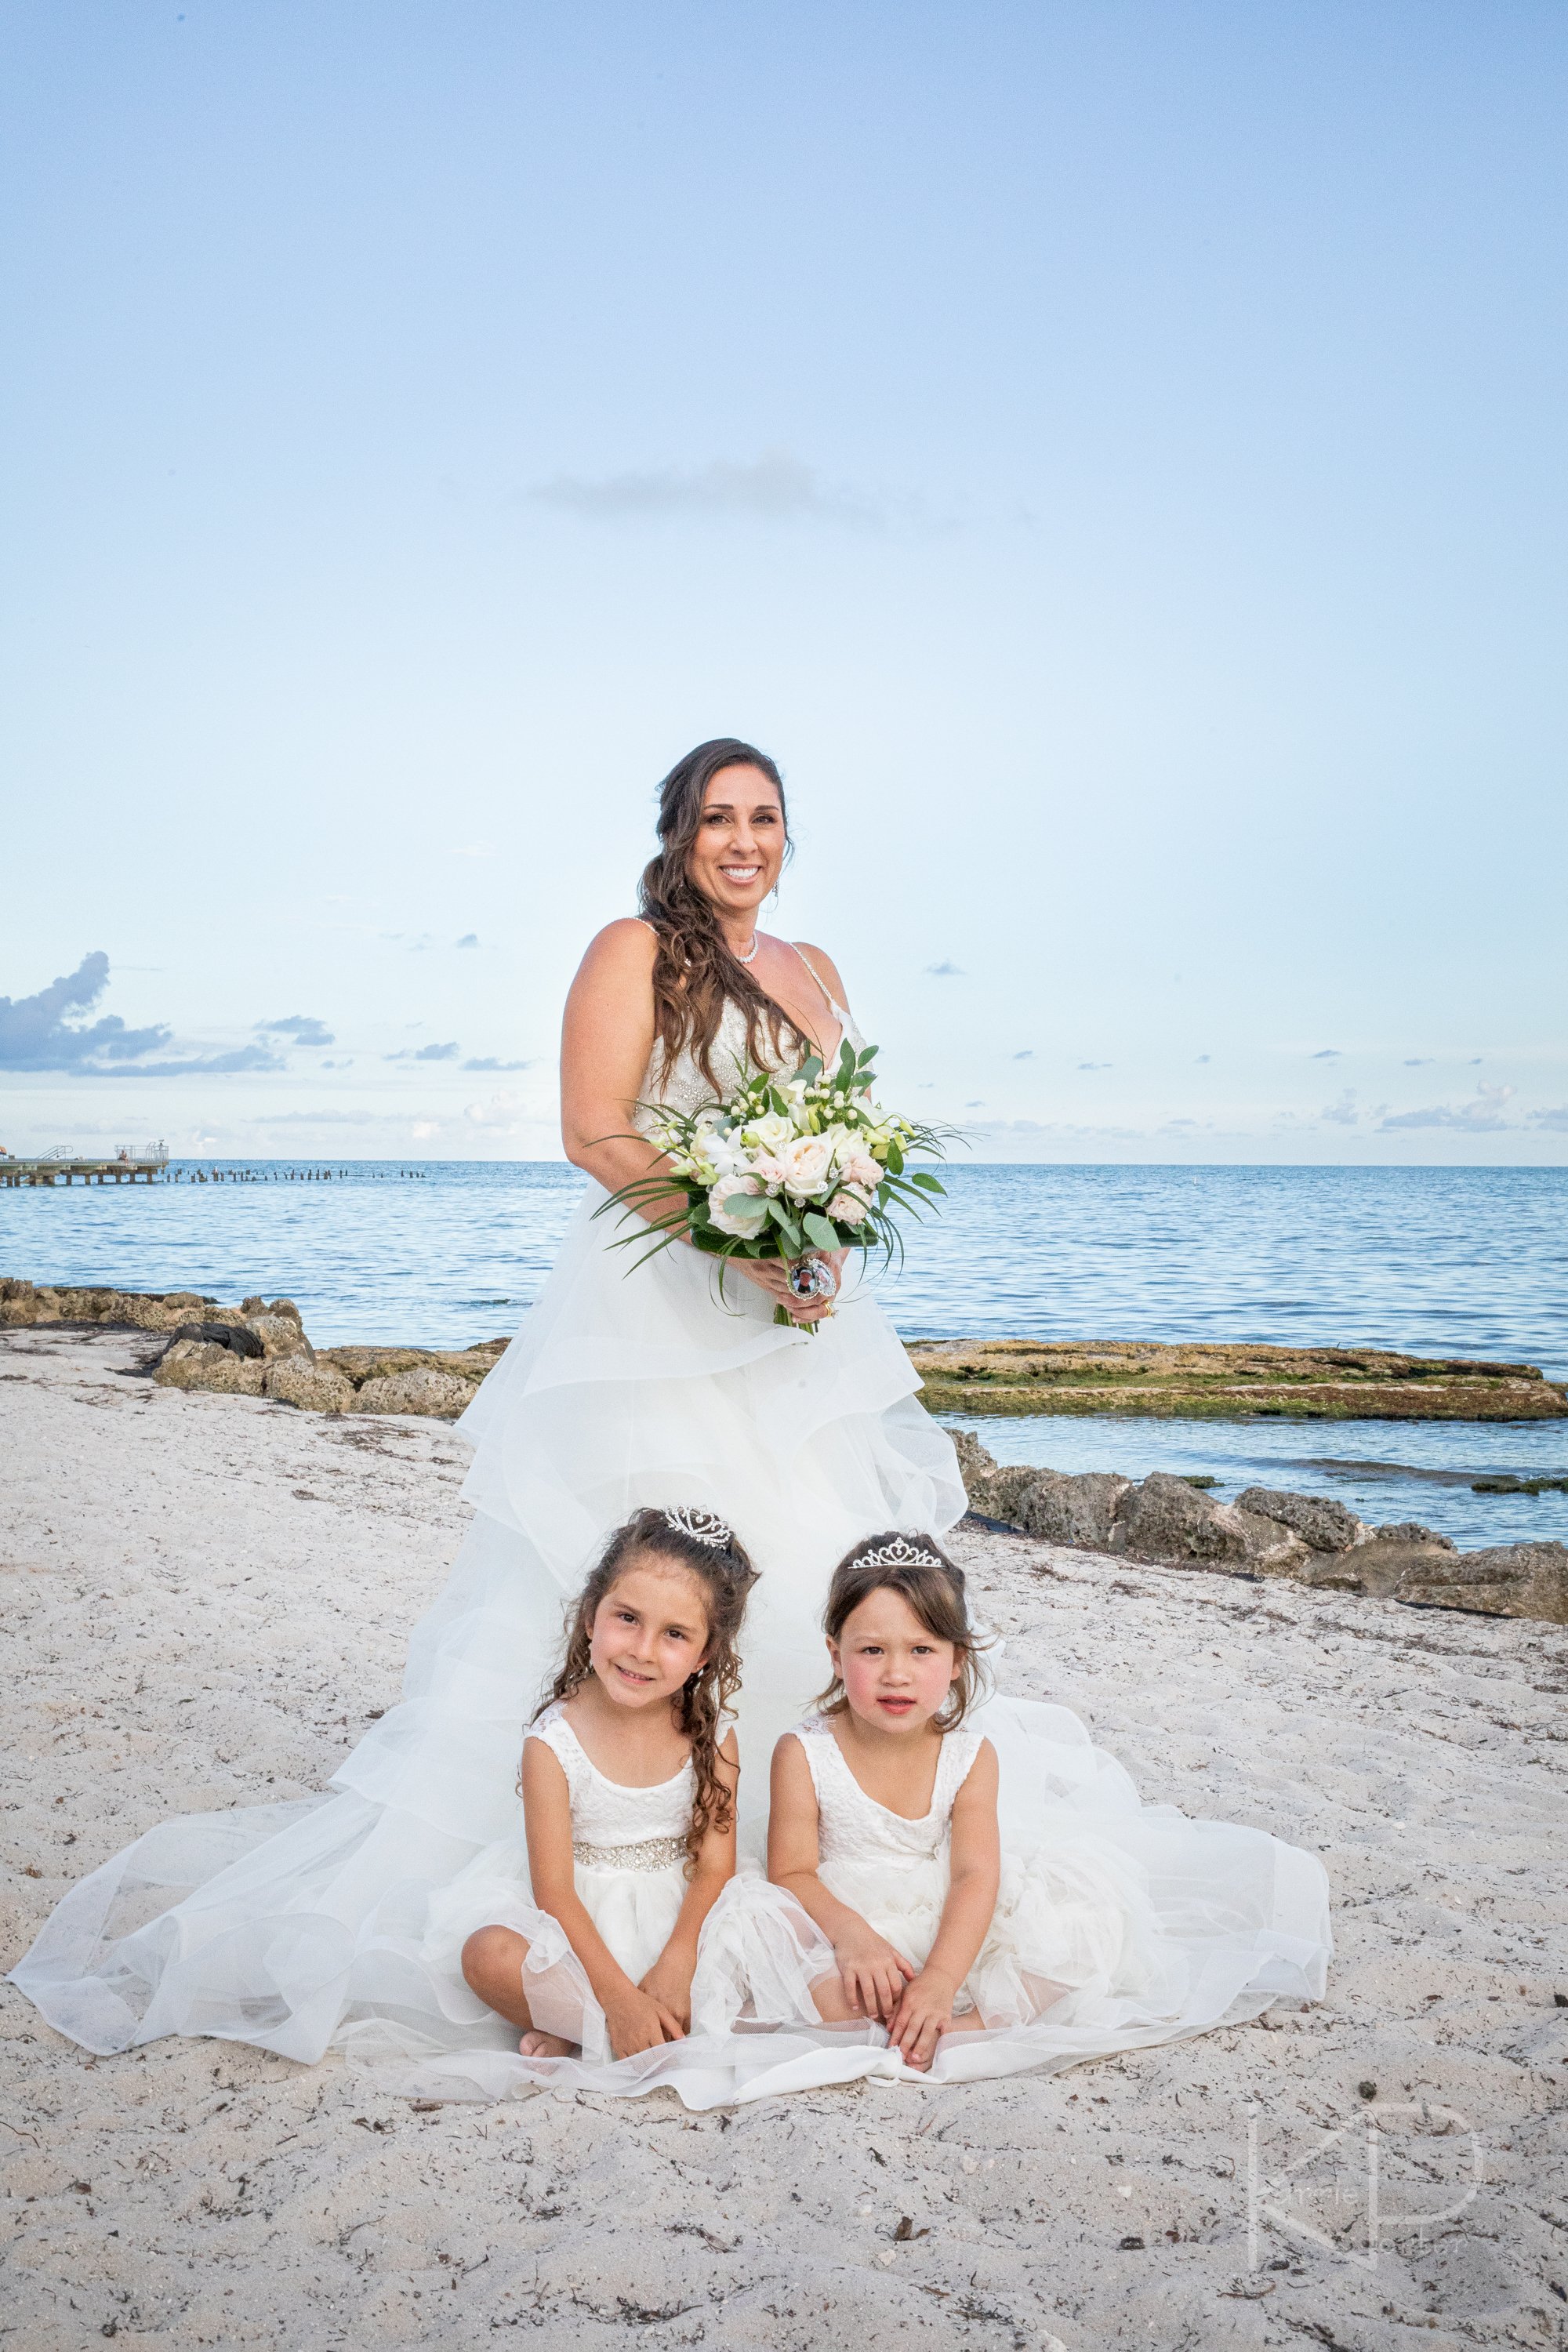  Destination vow renewal wedding anniversary at the Casa Marina Resort in Key West by photographer Karrie Porter 